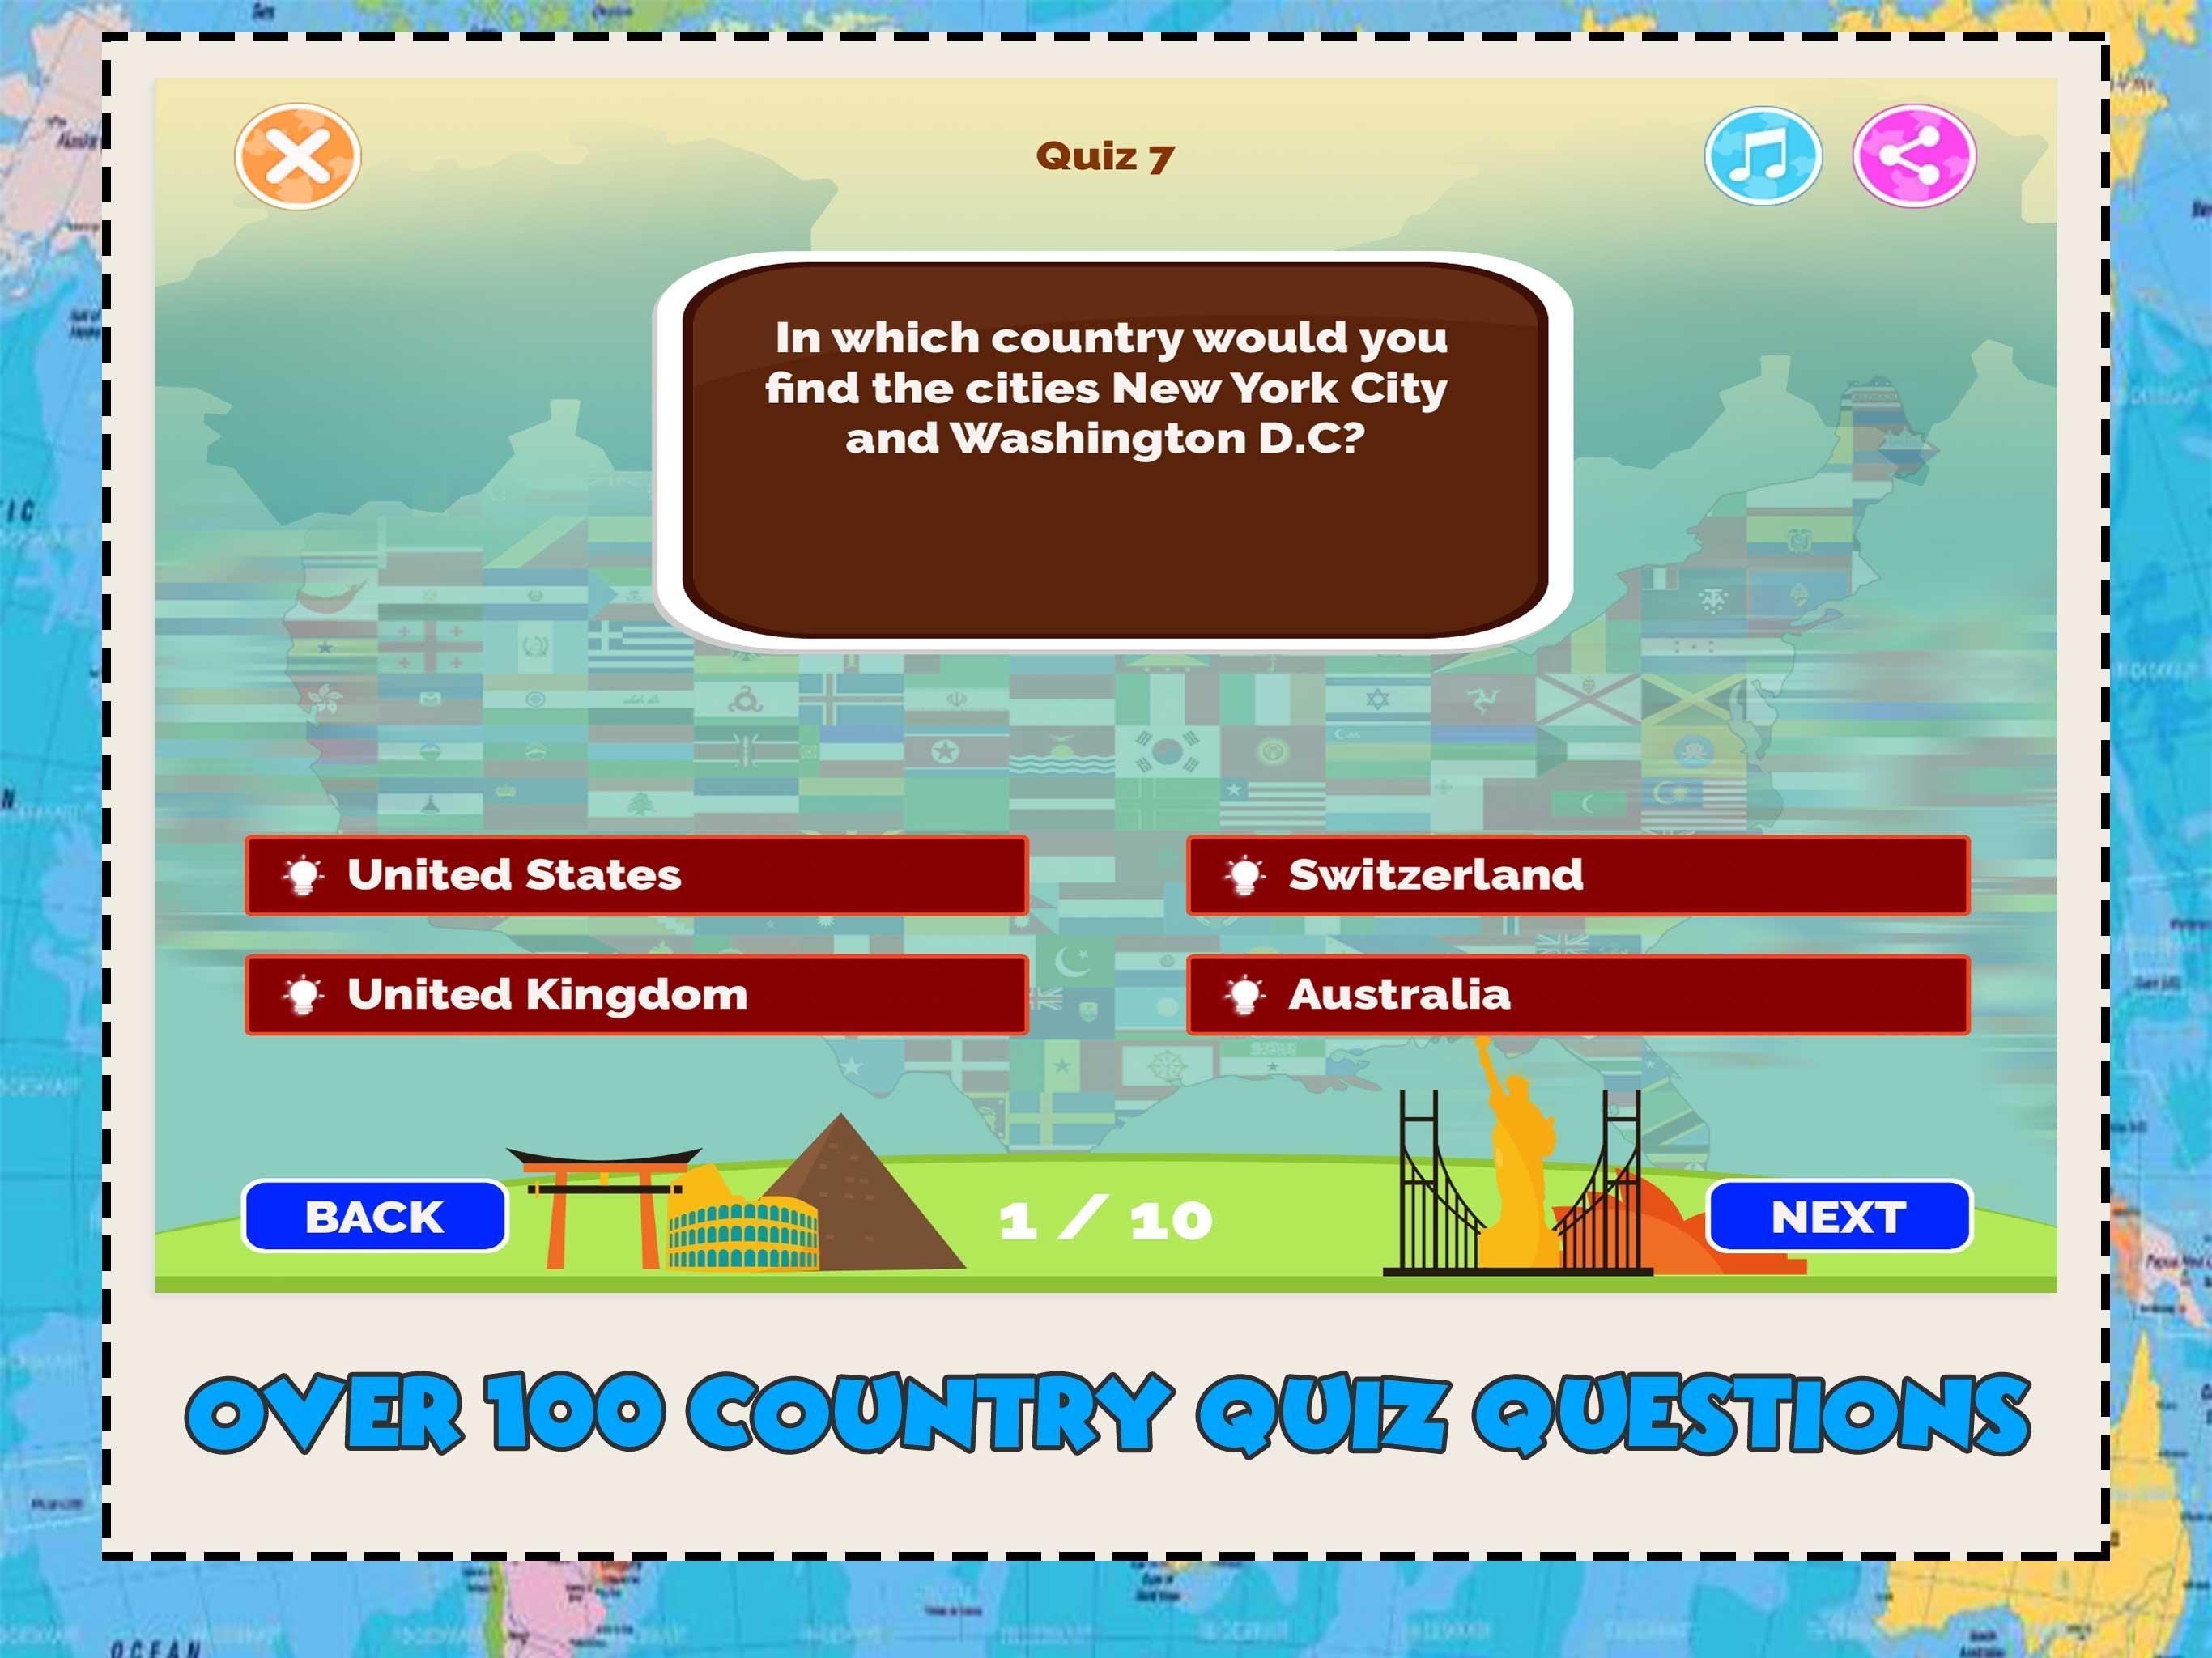 World Geography Games For Kids - Learn Countries 2.5 Screenshot 4